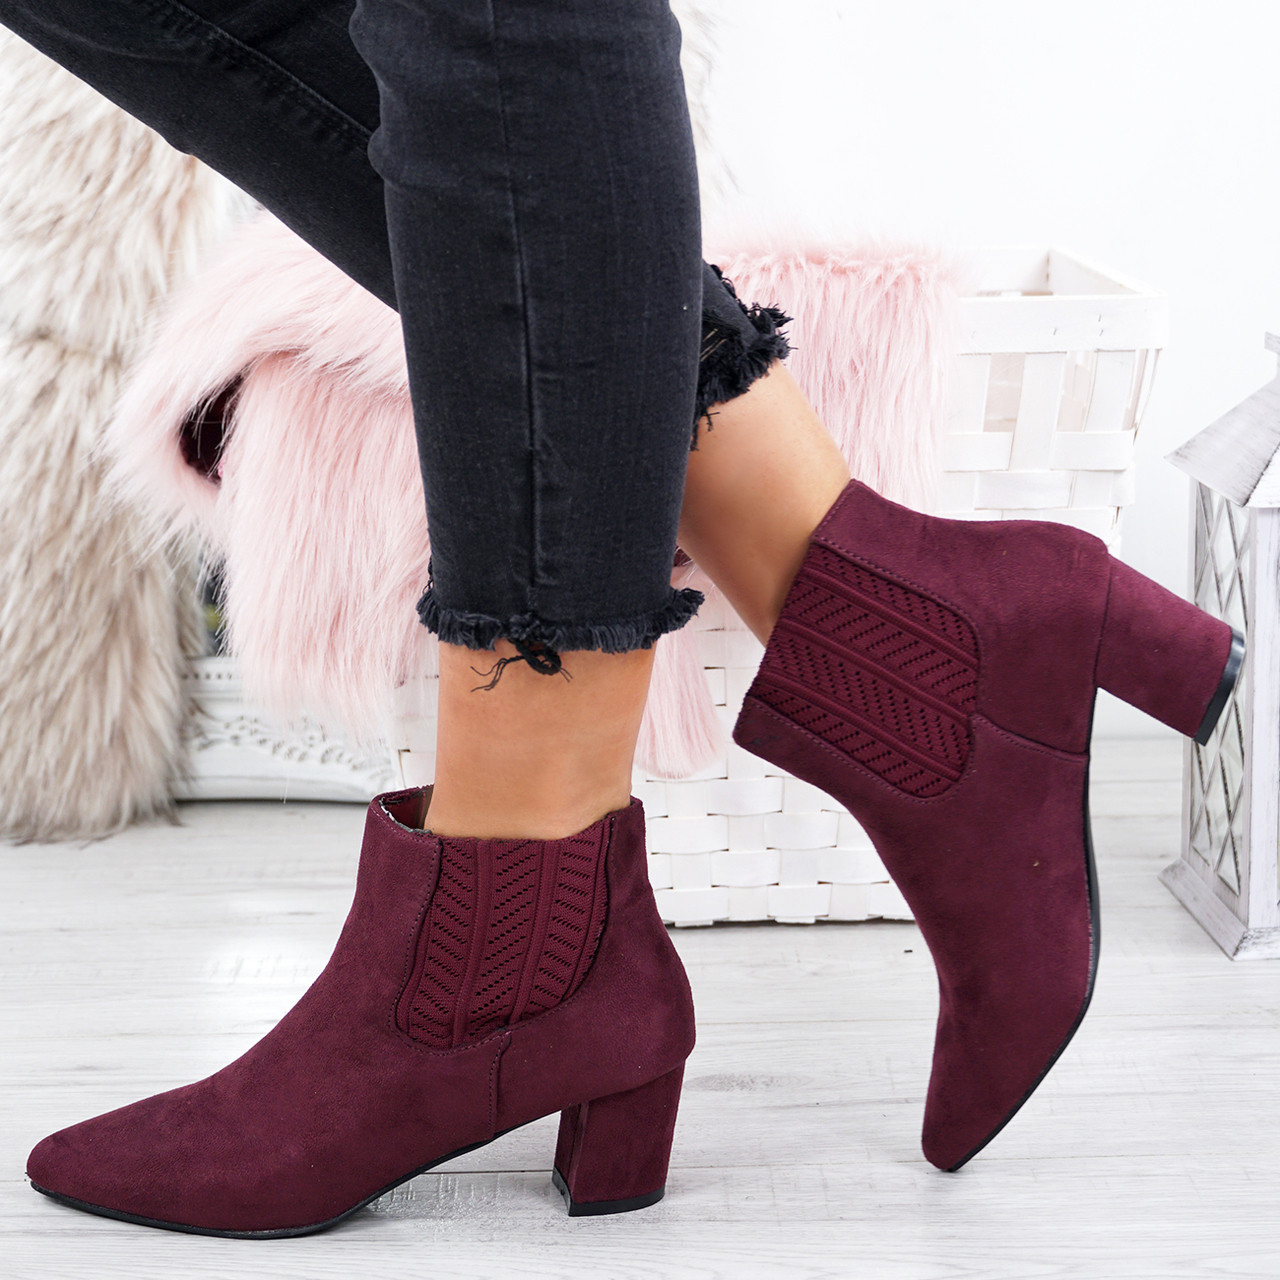 wine chelsea boots womens